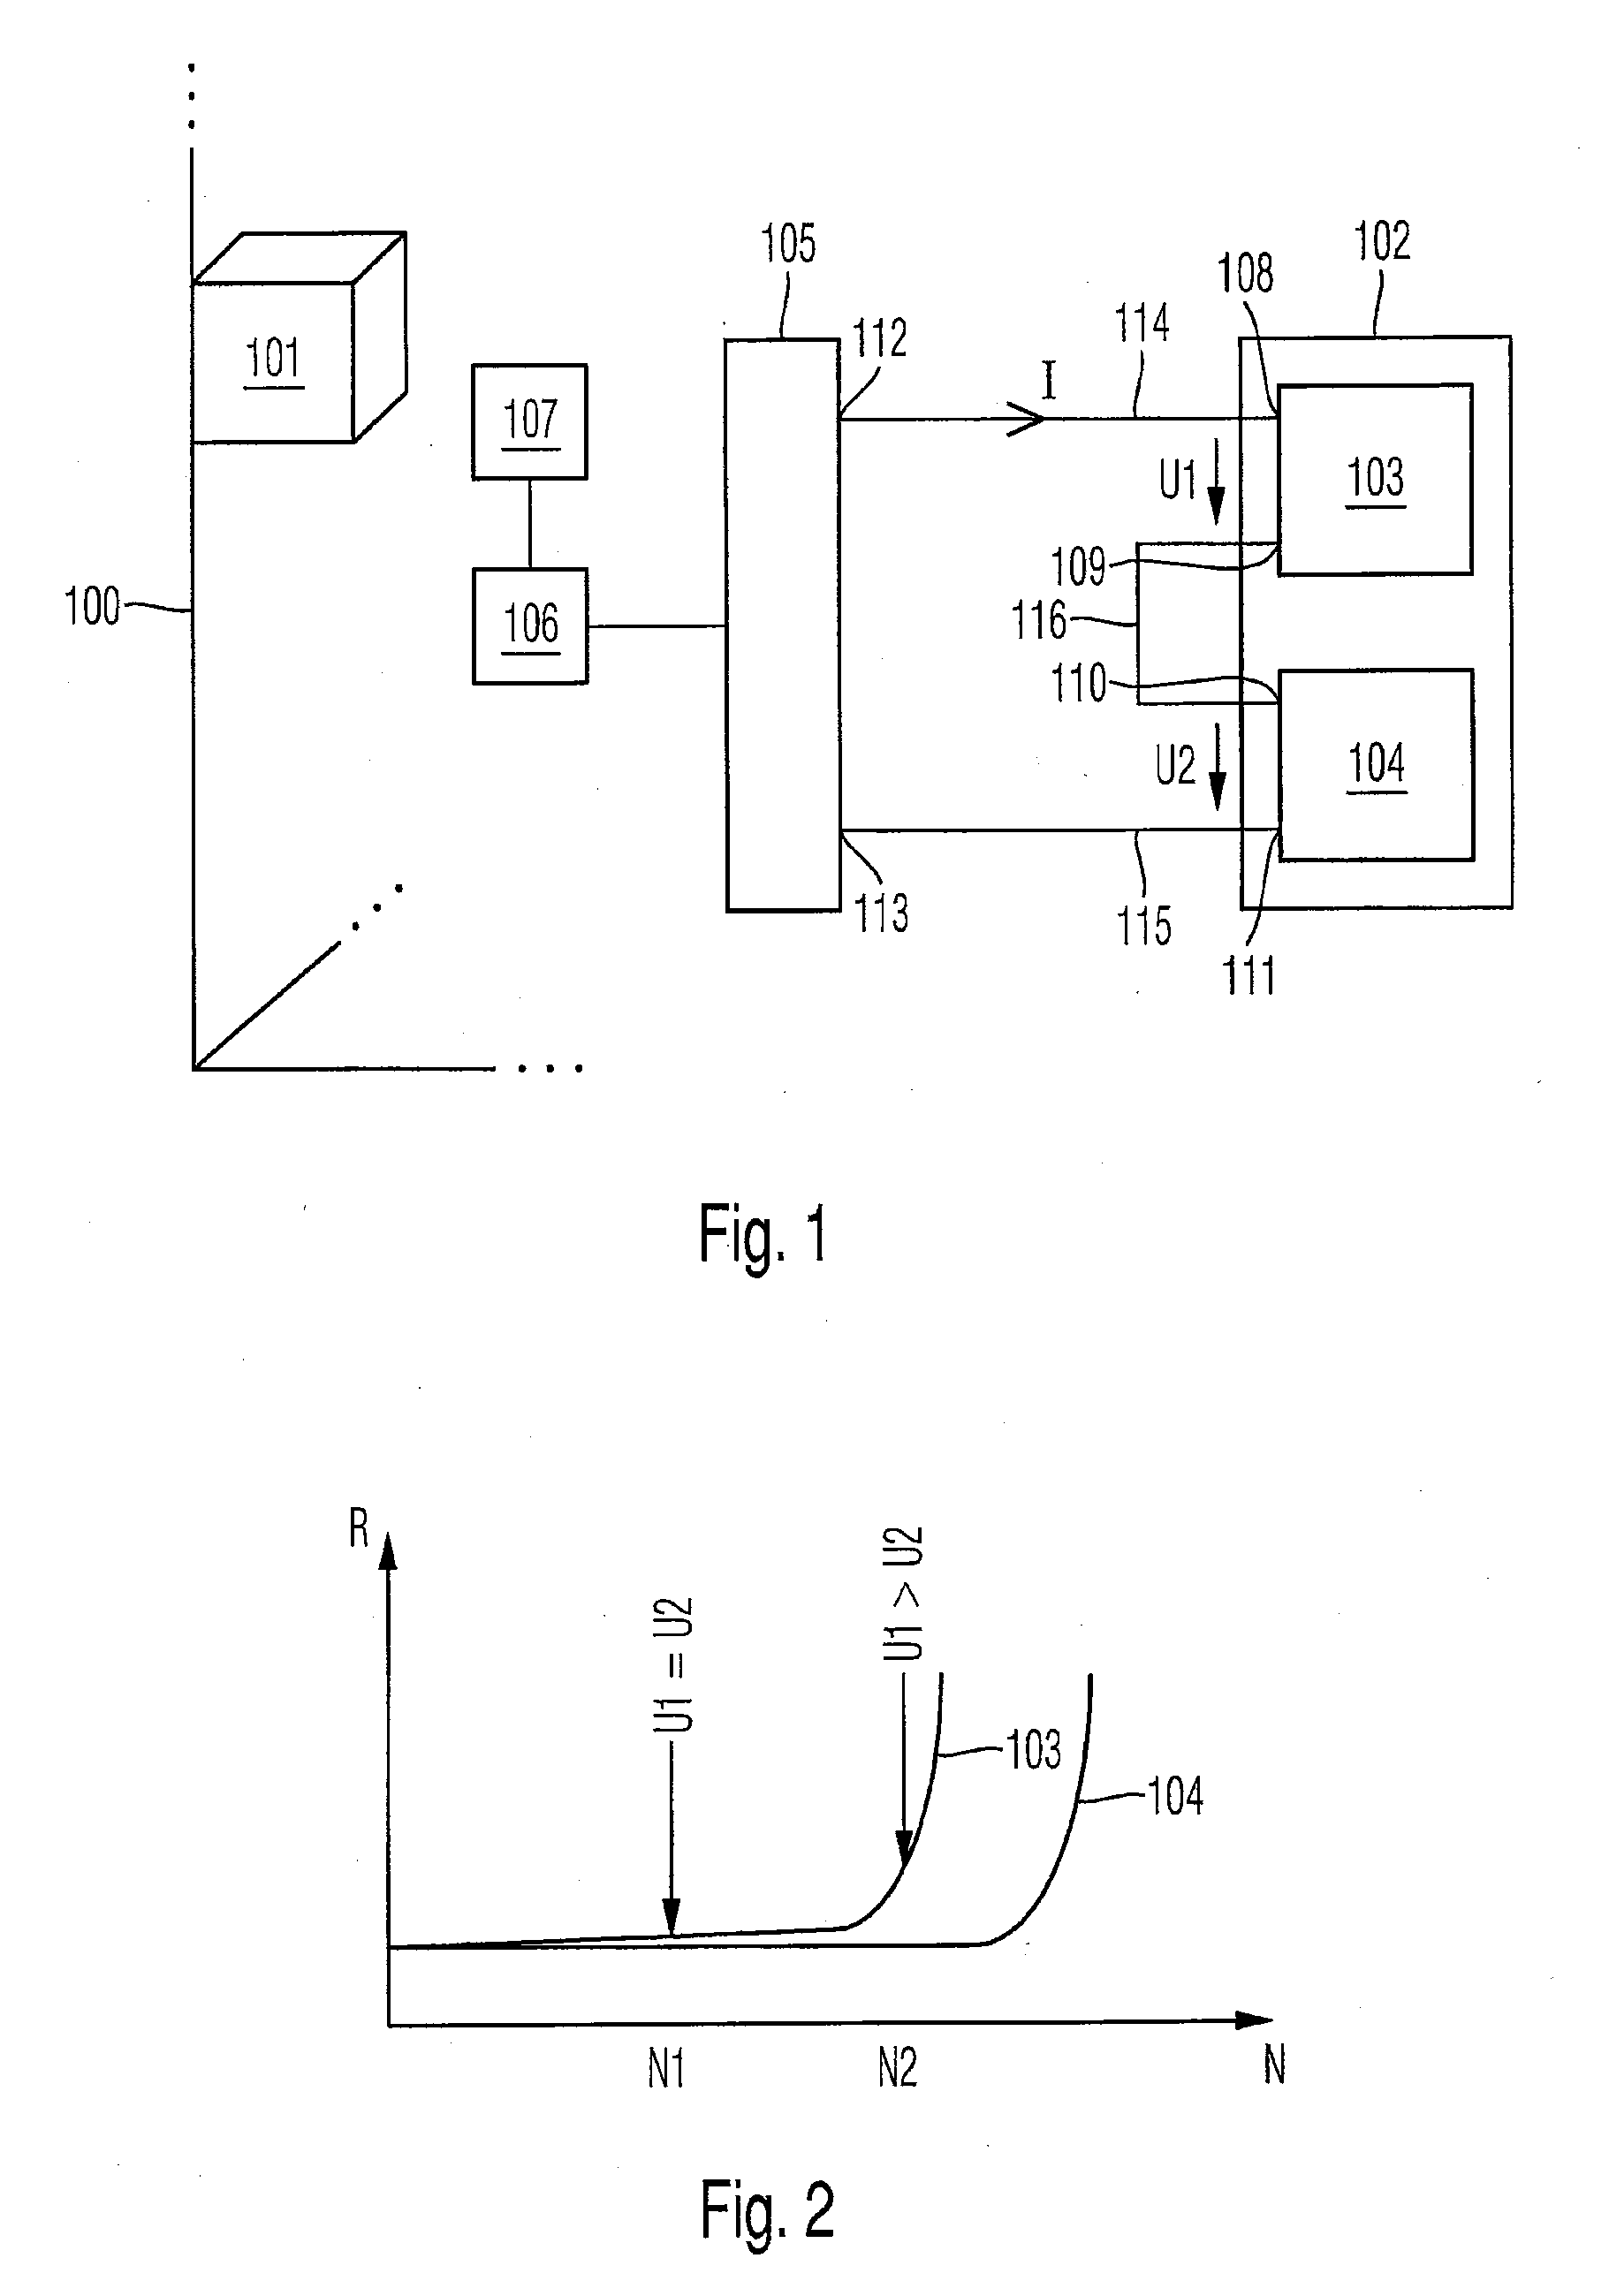 System and Methods for Monitoring a Thermoelectric Heating and Cooling Device